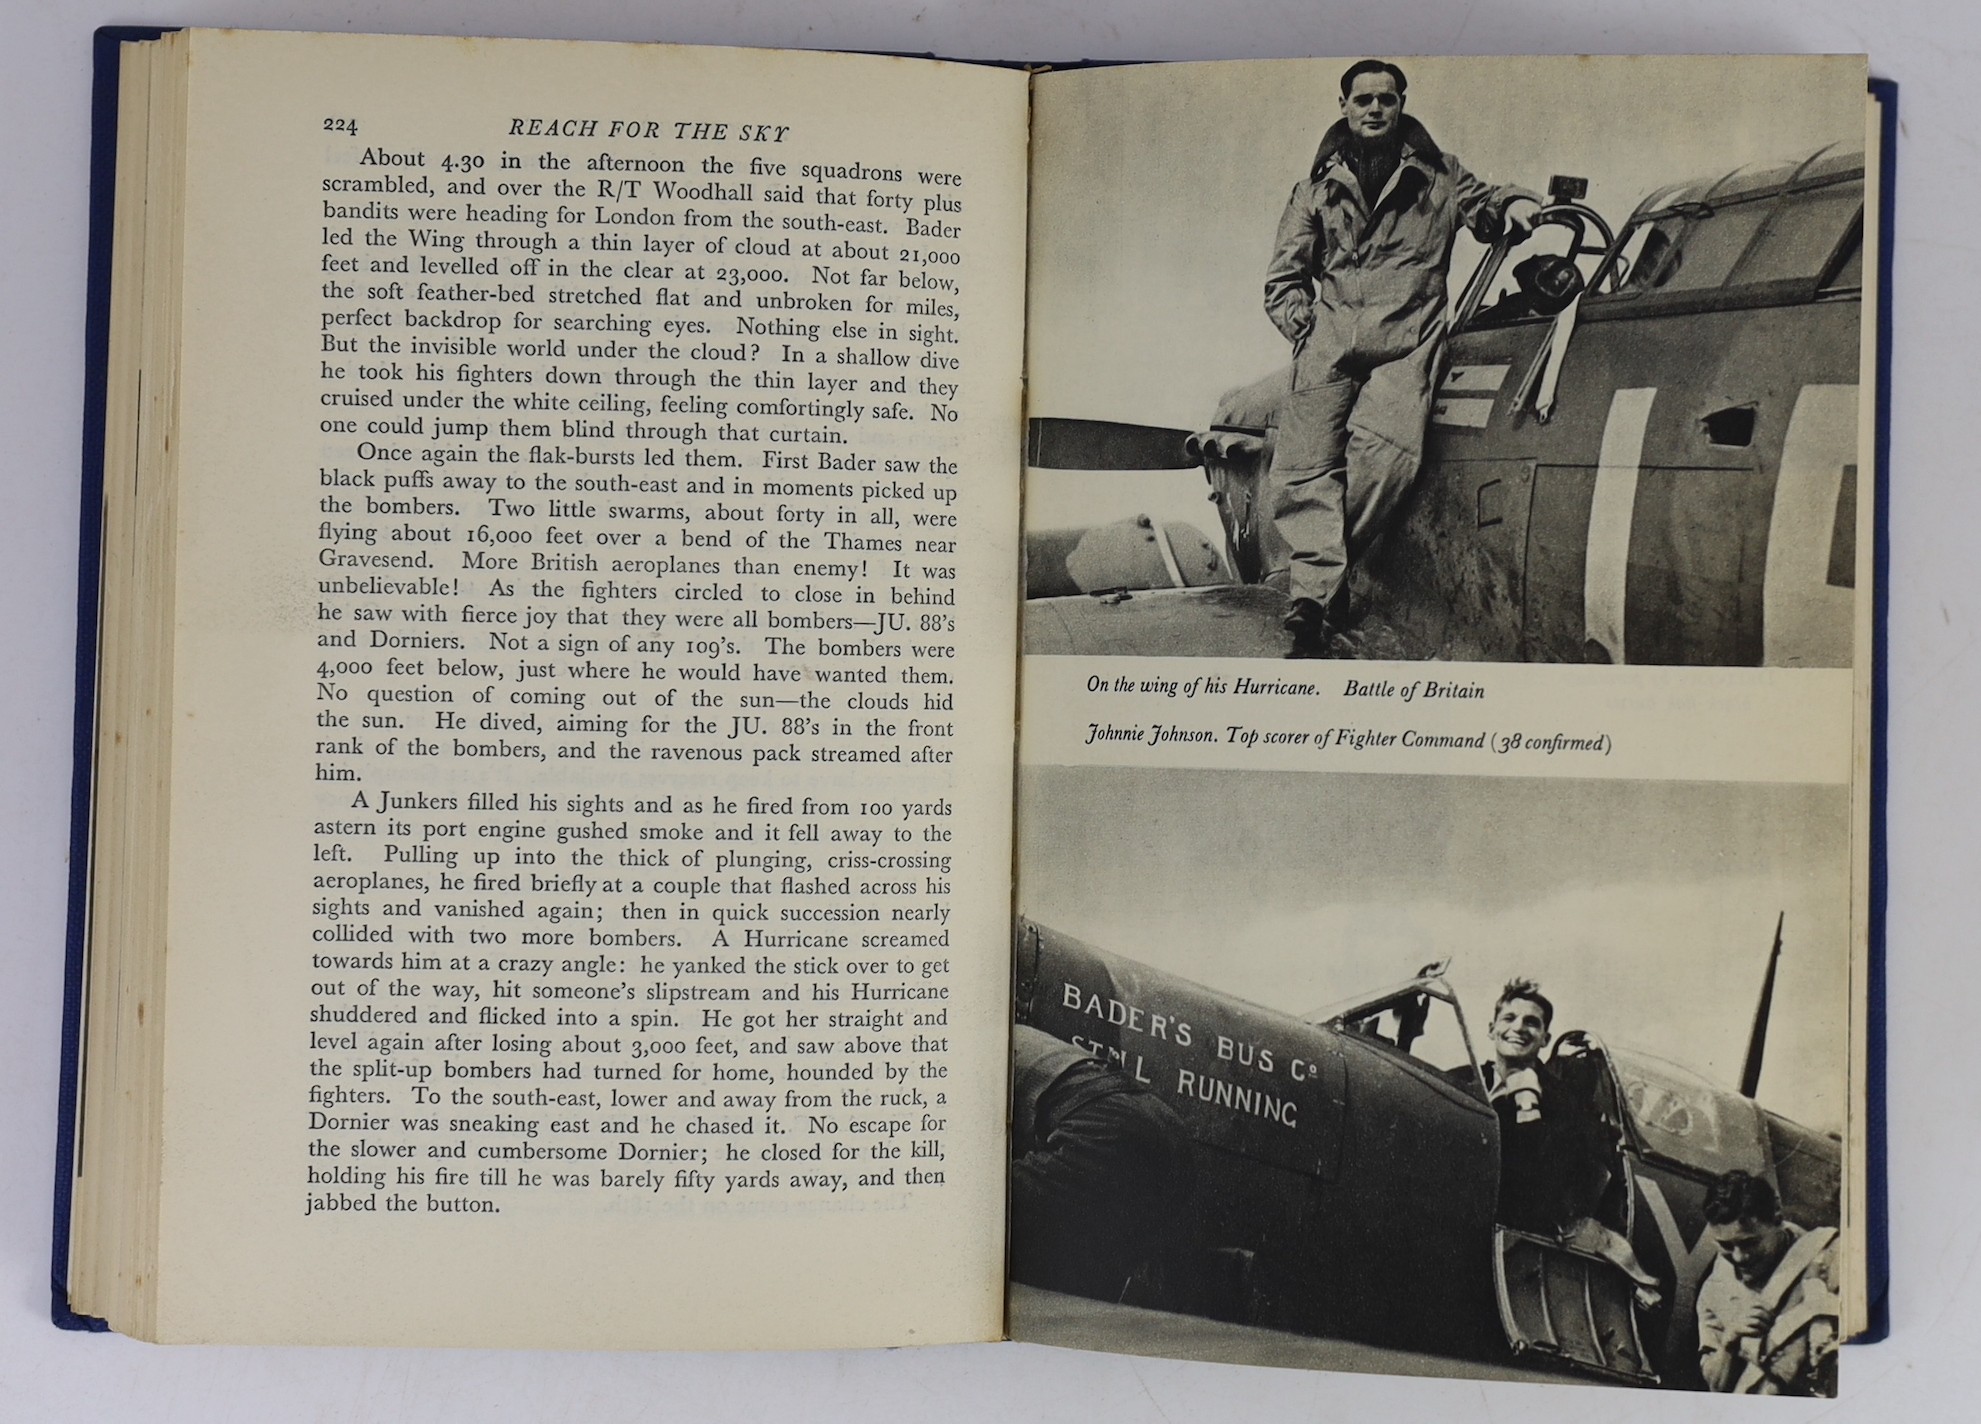 Brickhill, Paul - Reach For the Sky: Douglas Bader His Life Story, 8vo, cloth in unclipped d/j, signed by Douglas Bader, dated 19th March, 1954, Collins, London, 1954